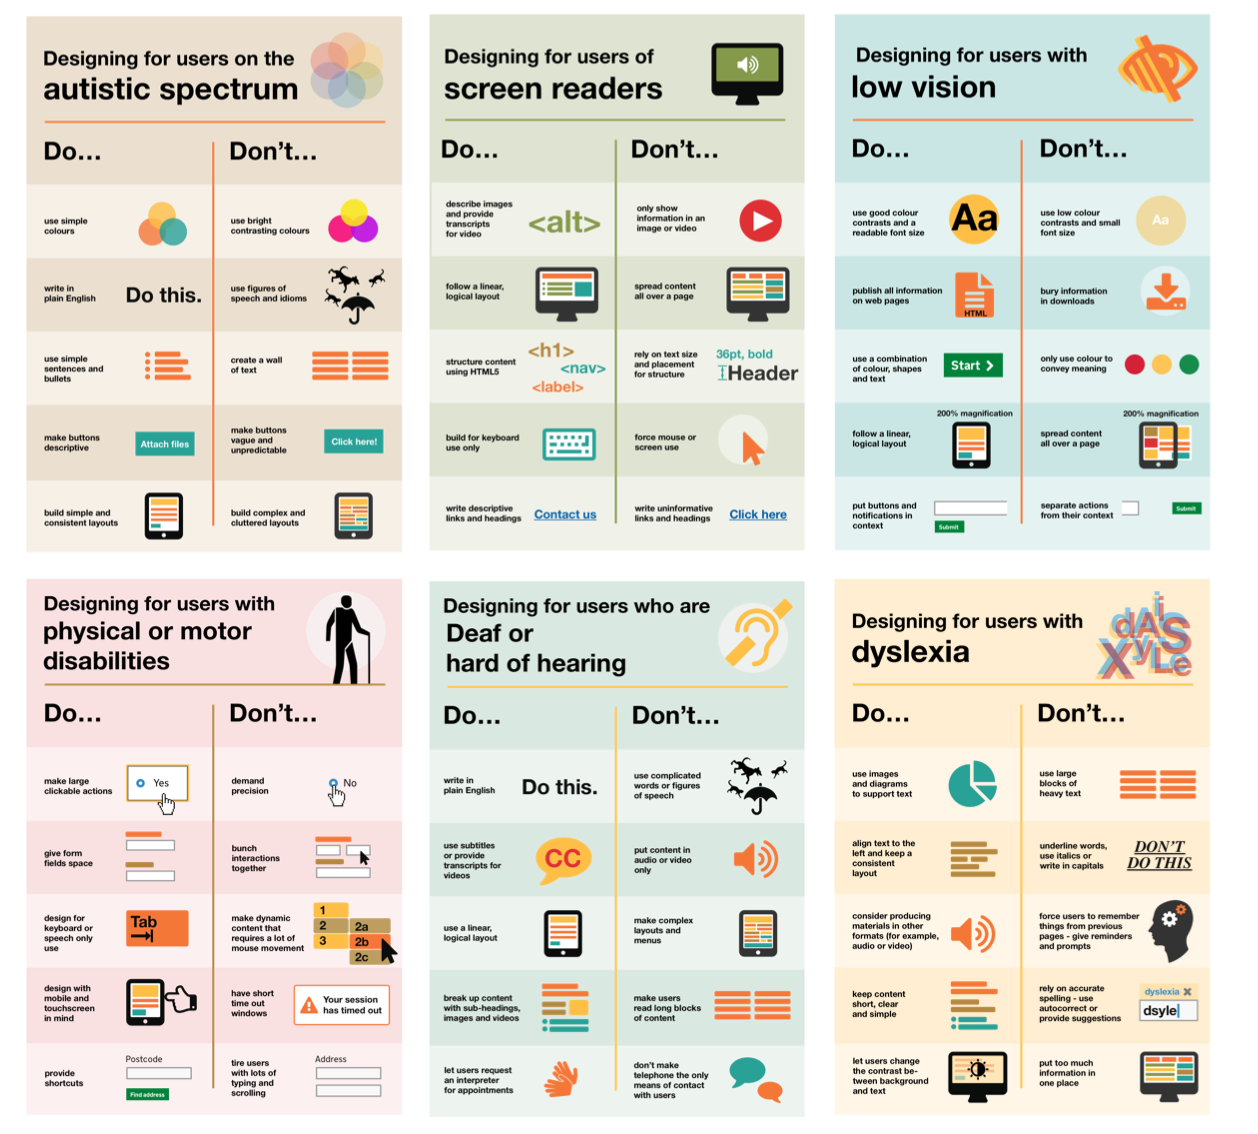 Posters showing the dos and don'ts of designing for users with accessibility needs including autism, blindness, low vision, D/deaf or hard of hearing, mobility and dyslexia